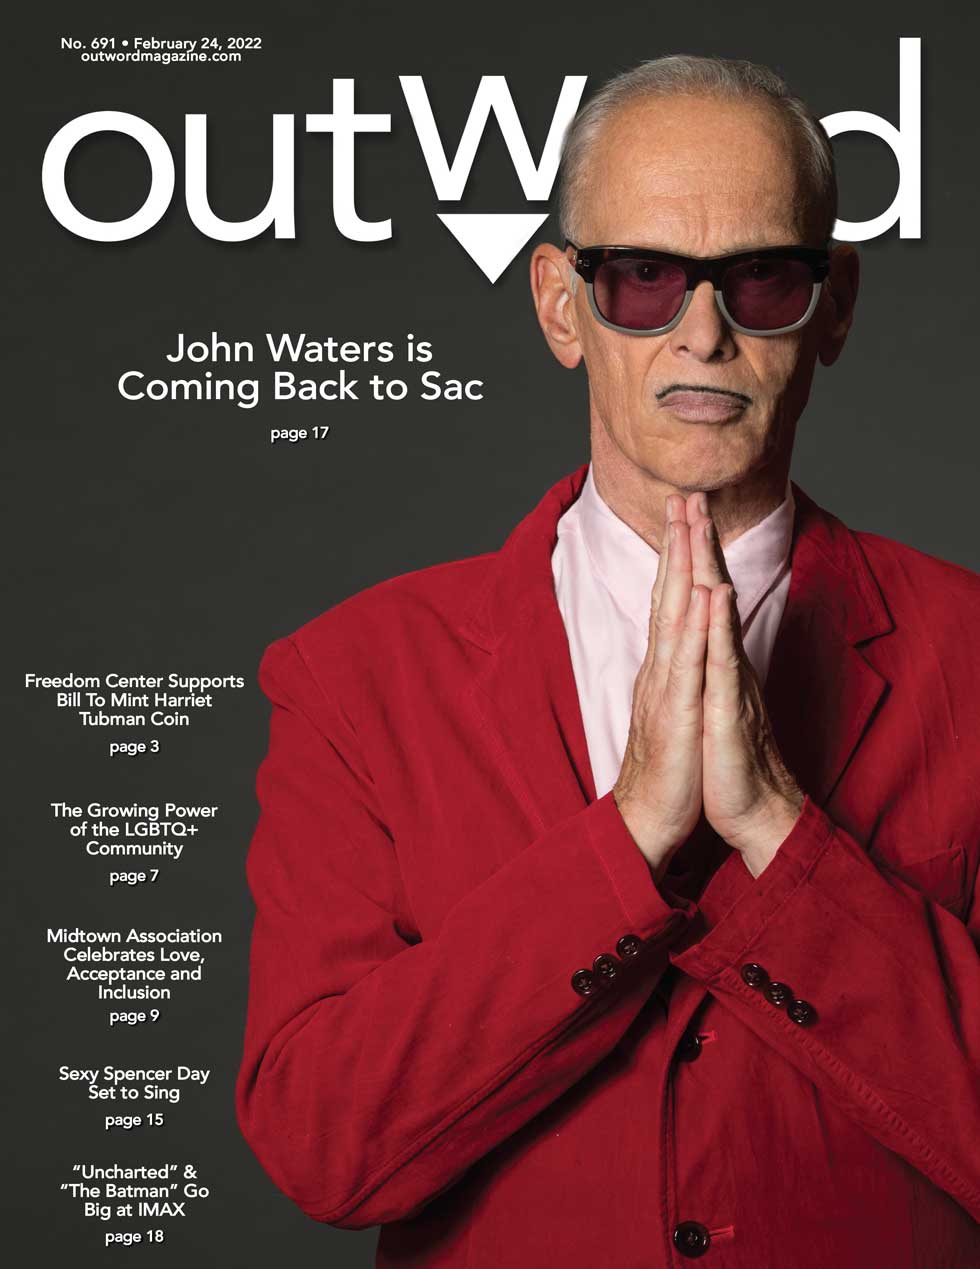 February 24, 2022 | It’s February 24, and the New Issue of Outword is Out Now!